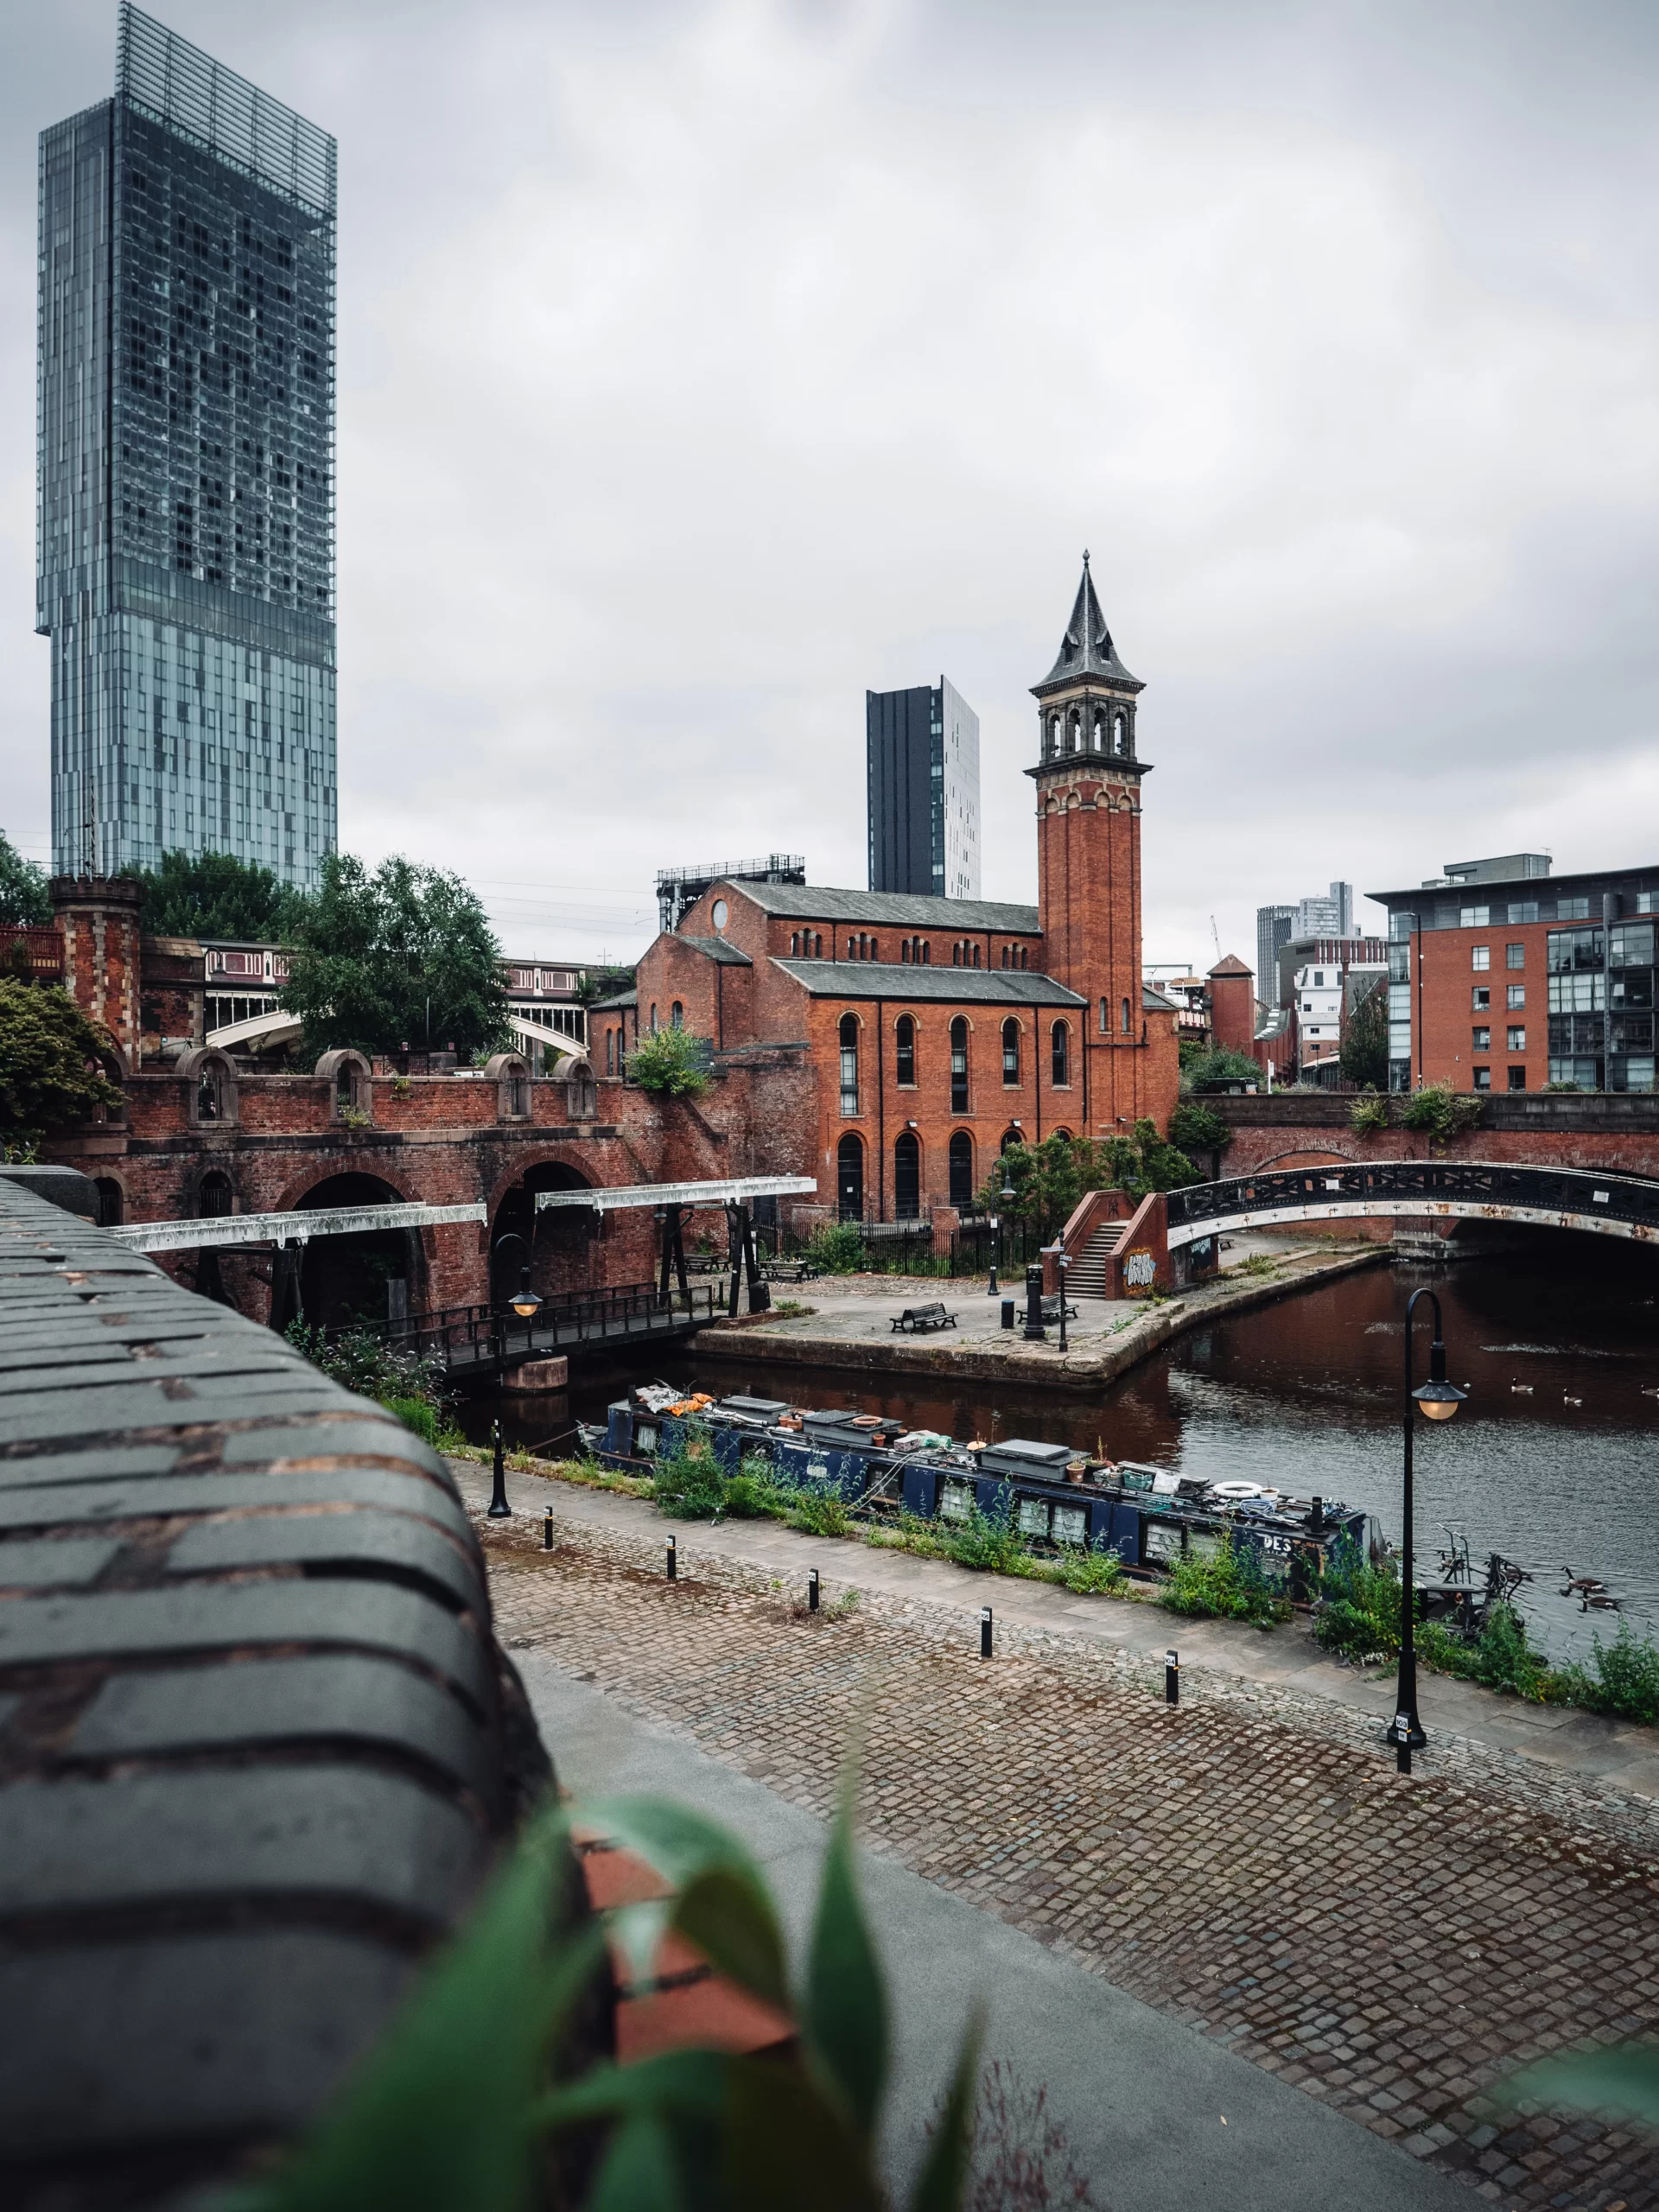 chris-curry-Manchester walkway along river and view of church in background-unsplash